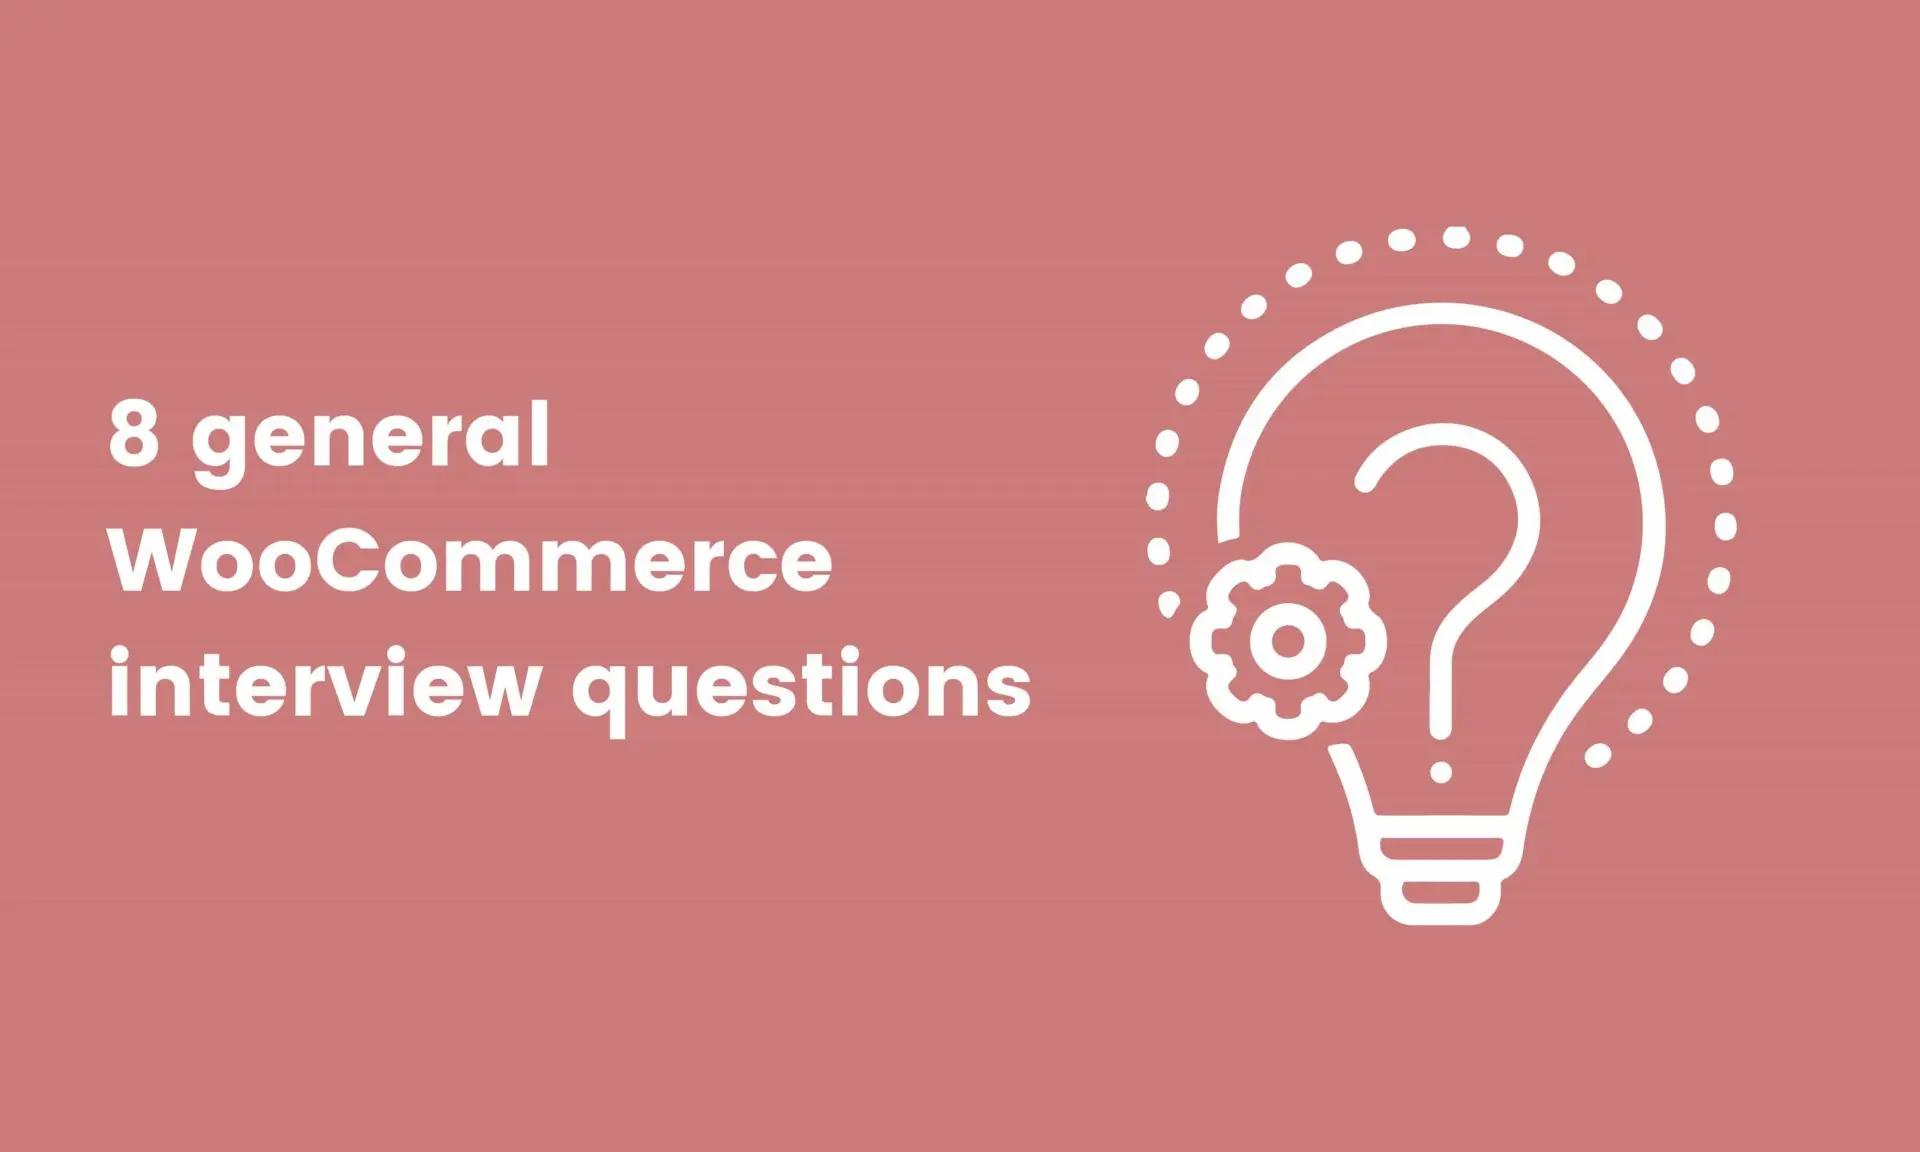 image showing 8 general WooCommerce interview questions